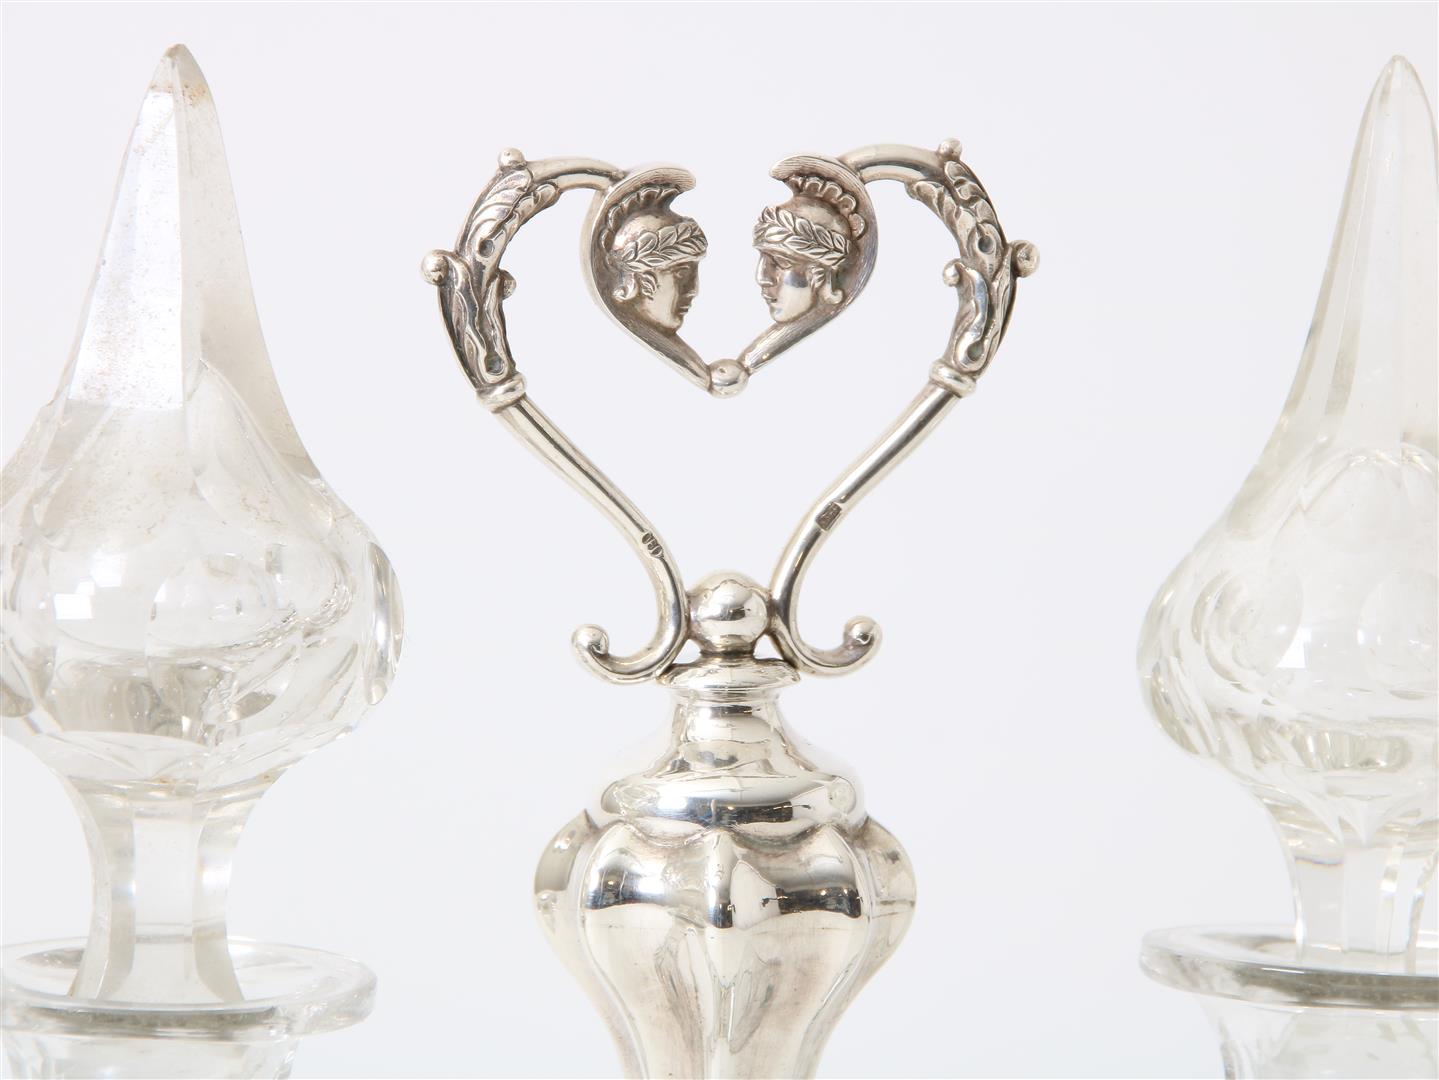 Silver oil and vinegar set with 2 decanters - Image 3 of 6